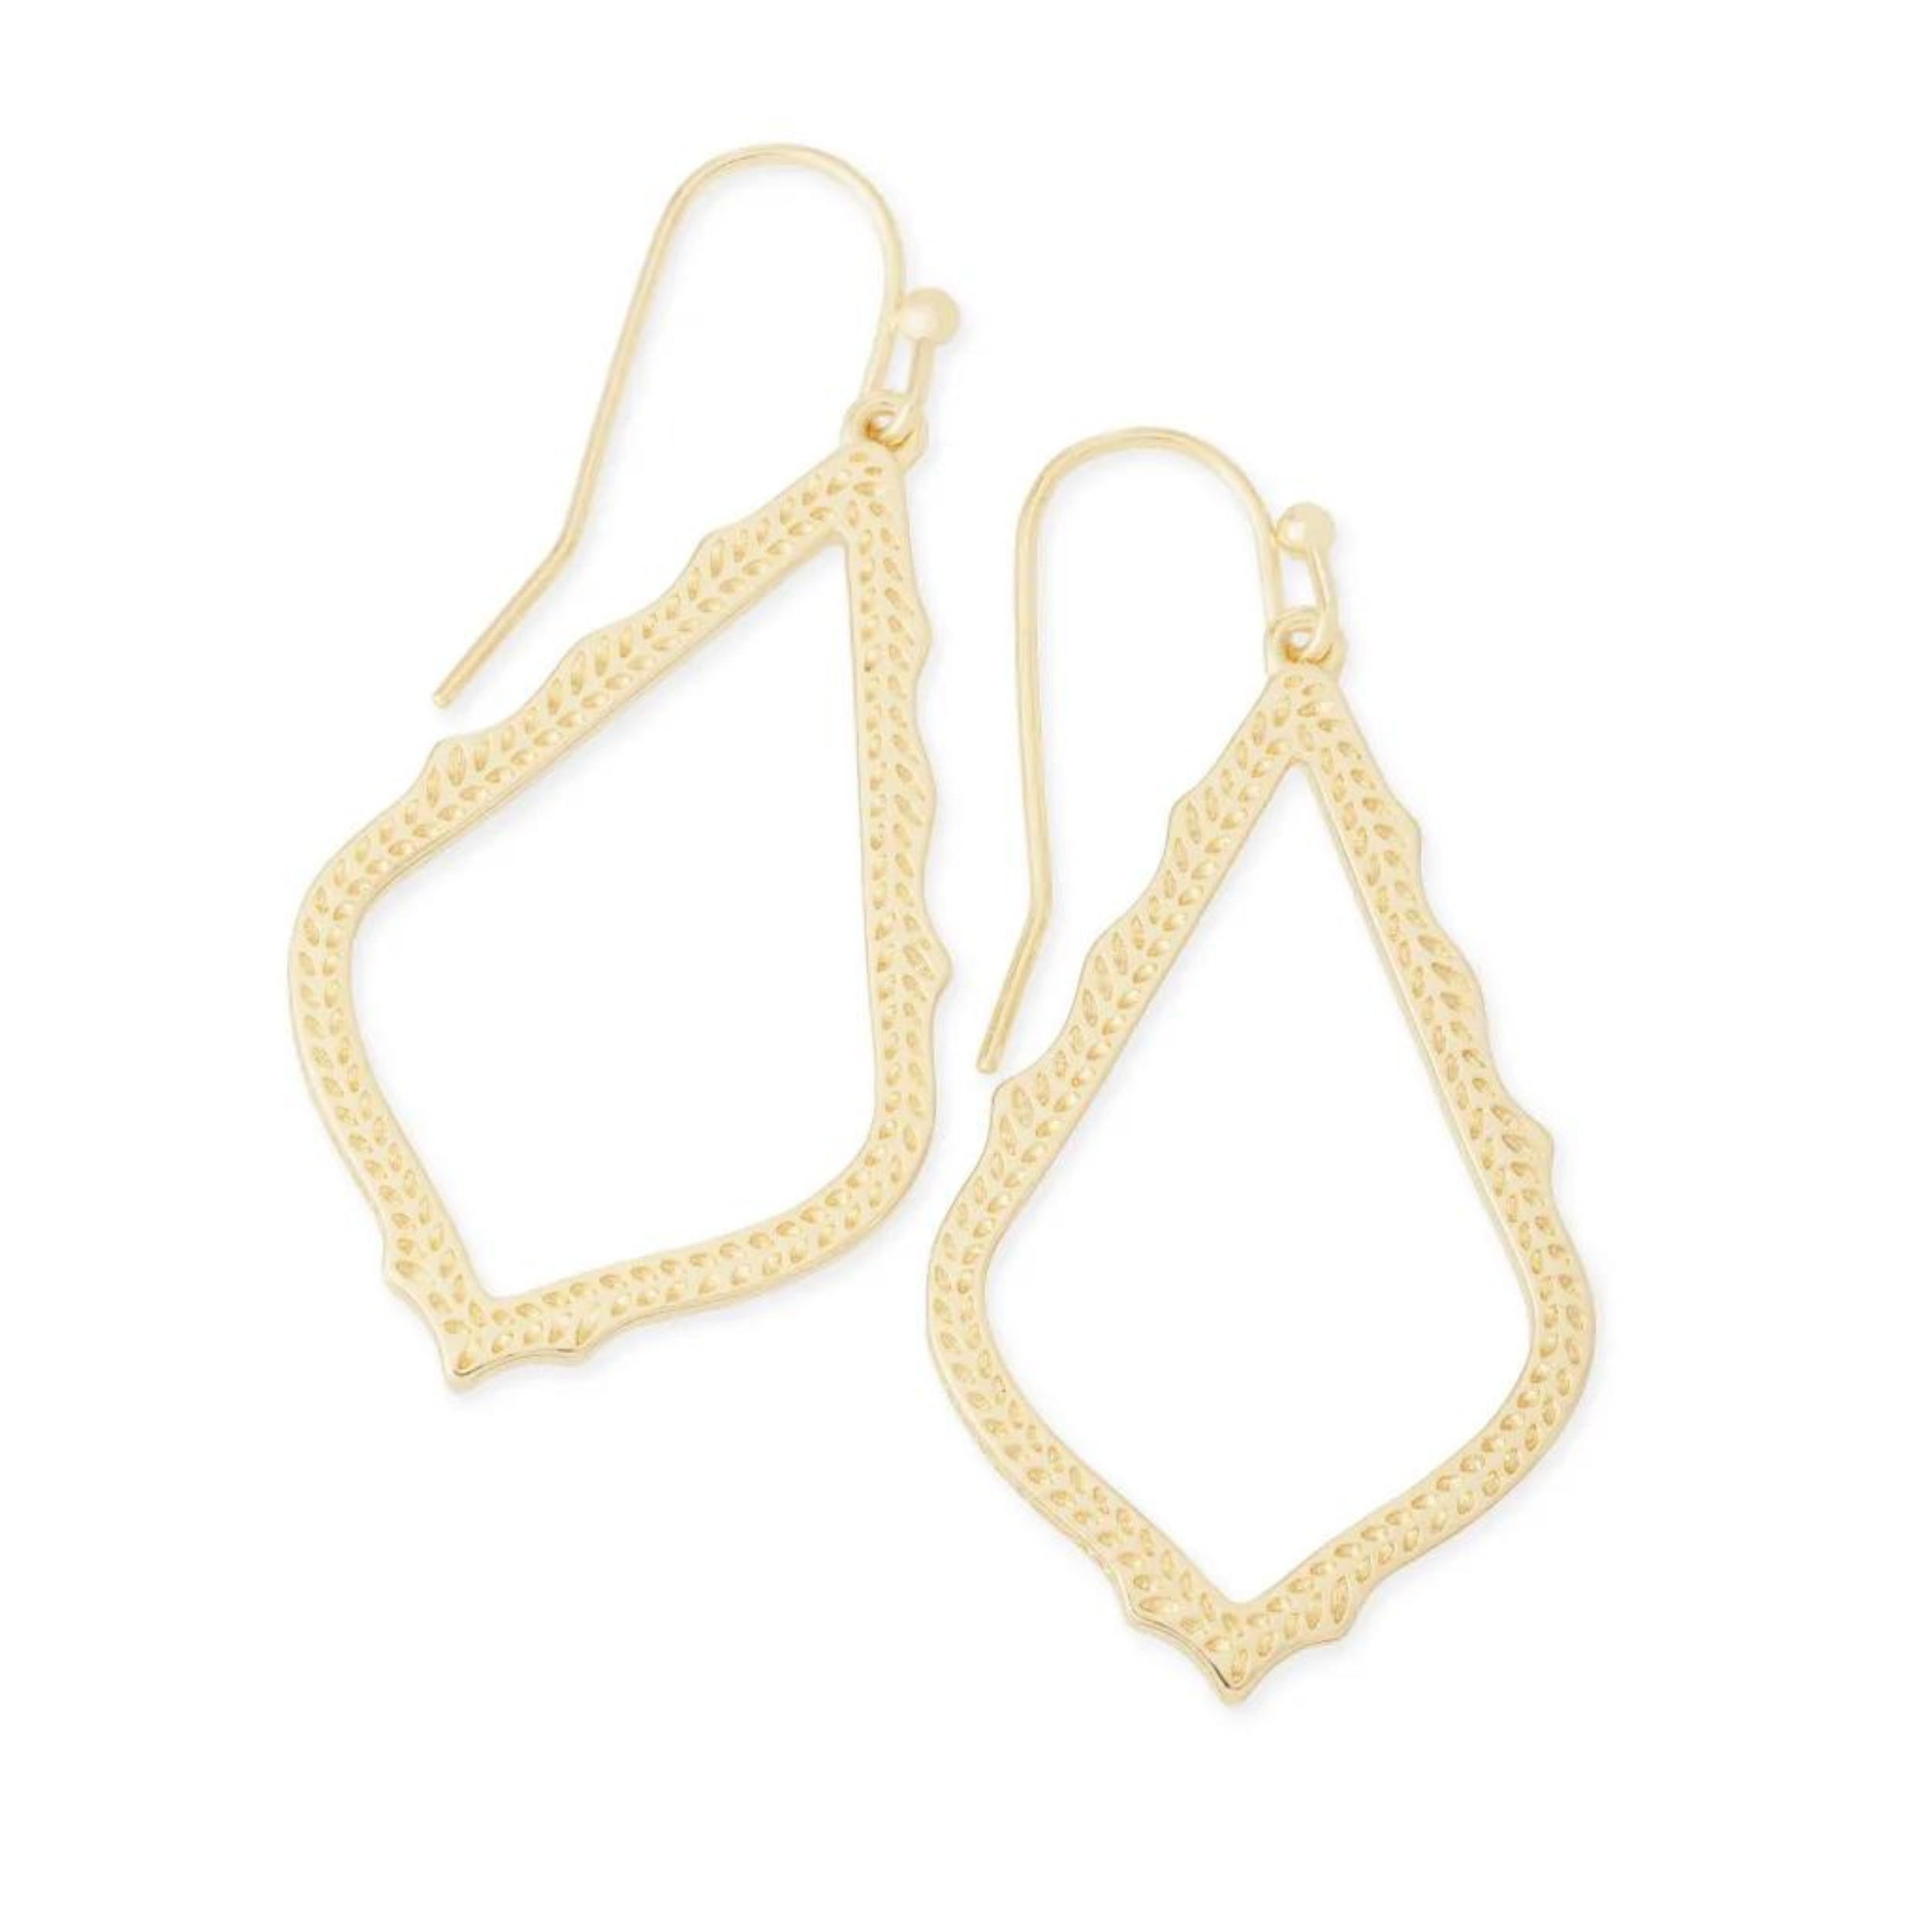 Gold dangle earrings pictured on a white background.